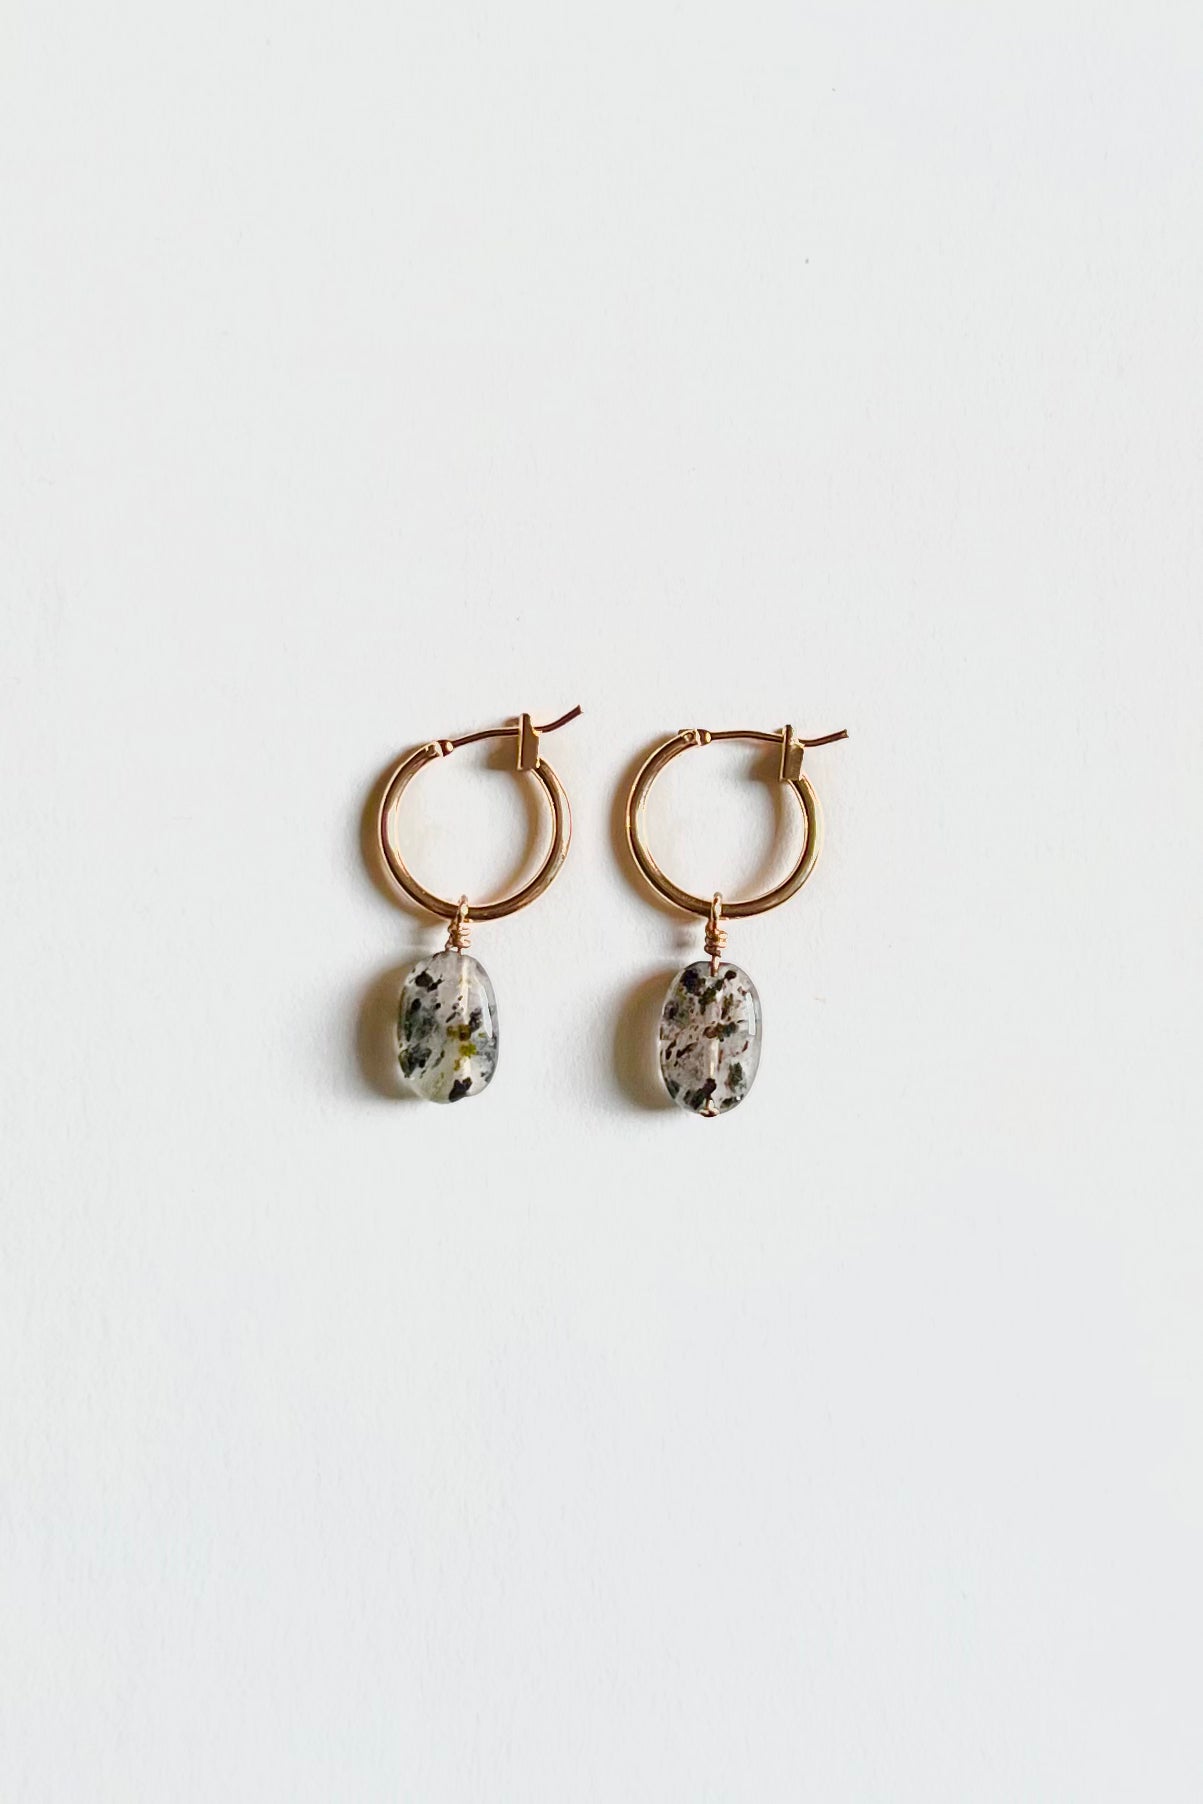 Gold hoop earrings with Dalmatian-like Black Rutilated Quartz Pendants, showcased on a clean white background with top view angle.